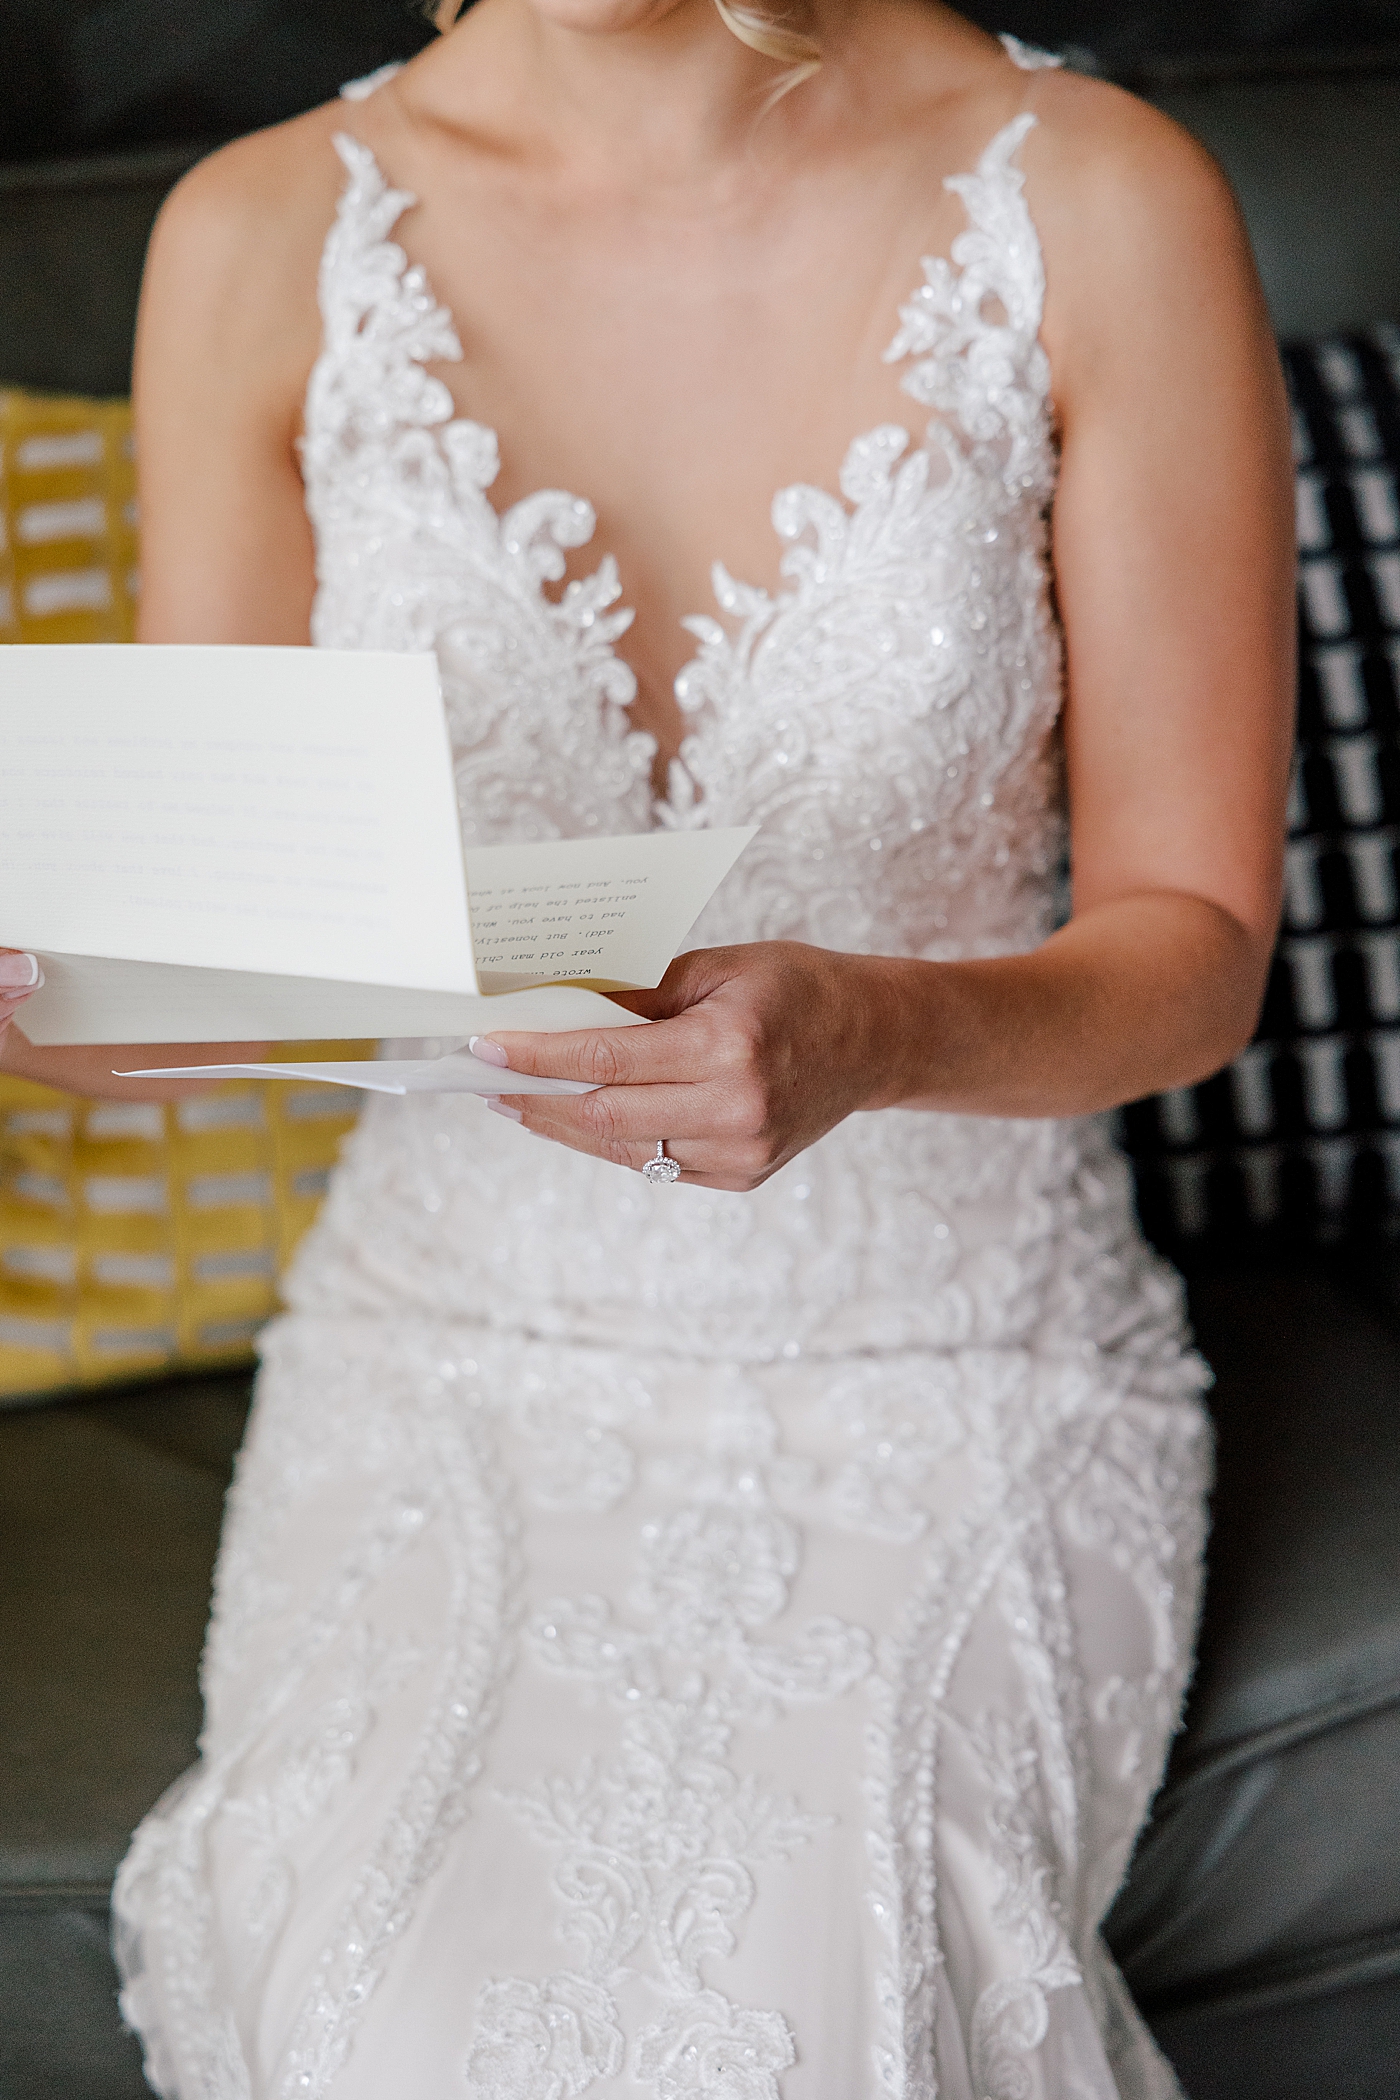 Bride reading a letter from groom | Image by Hope Helmuth Photography